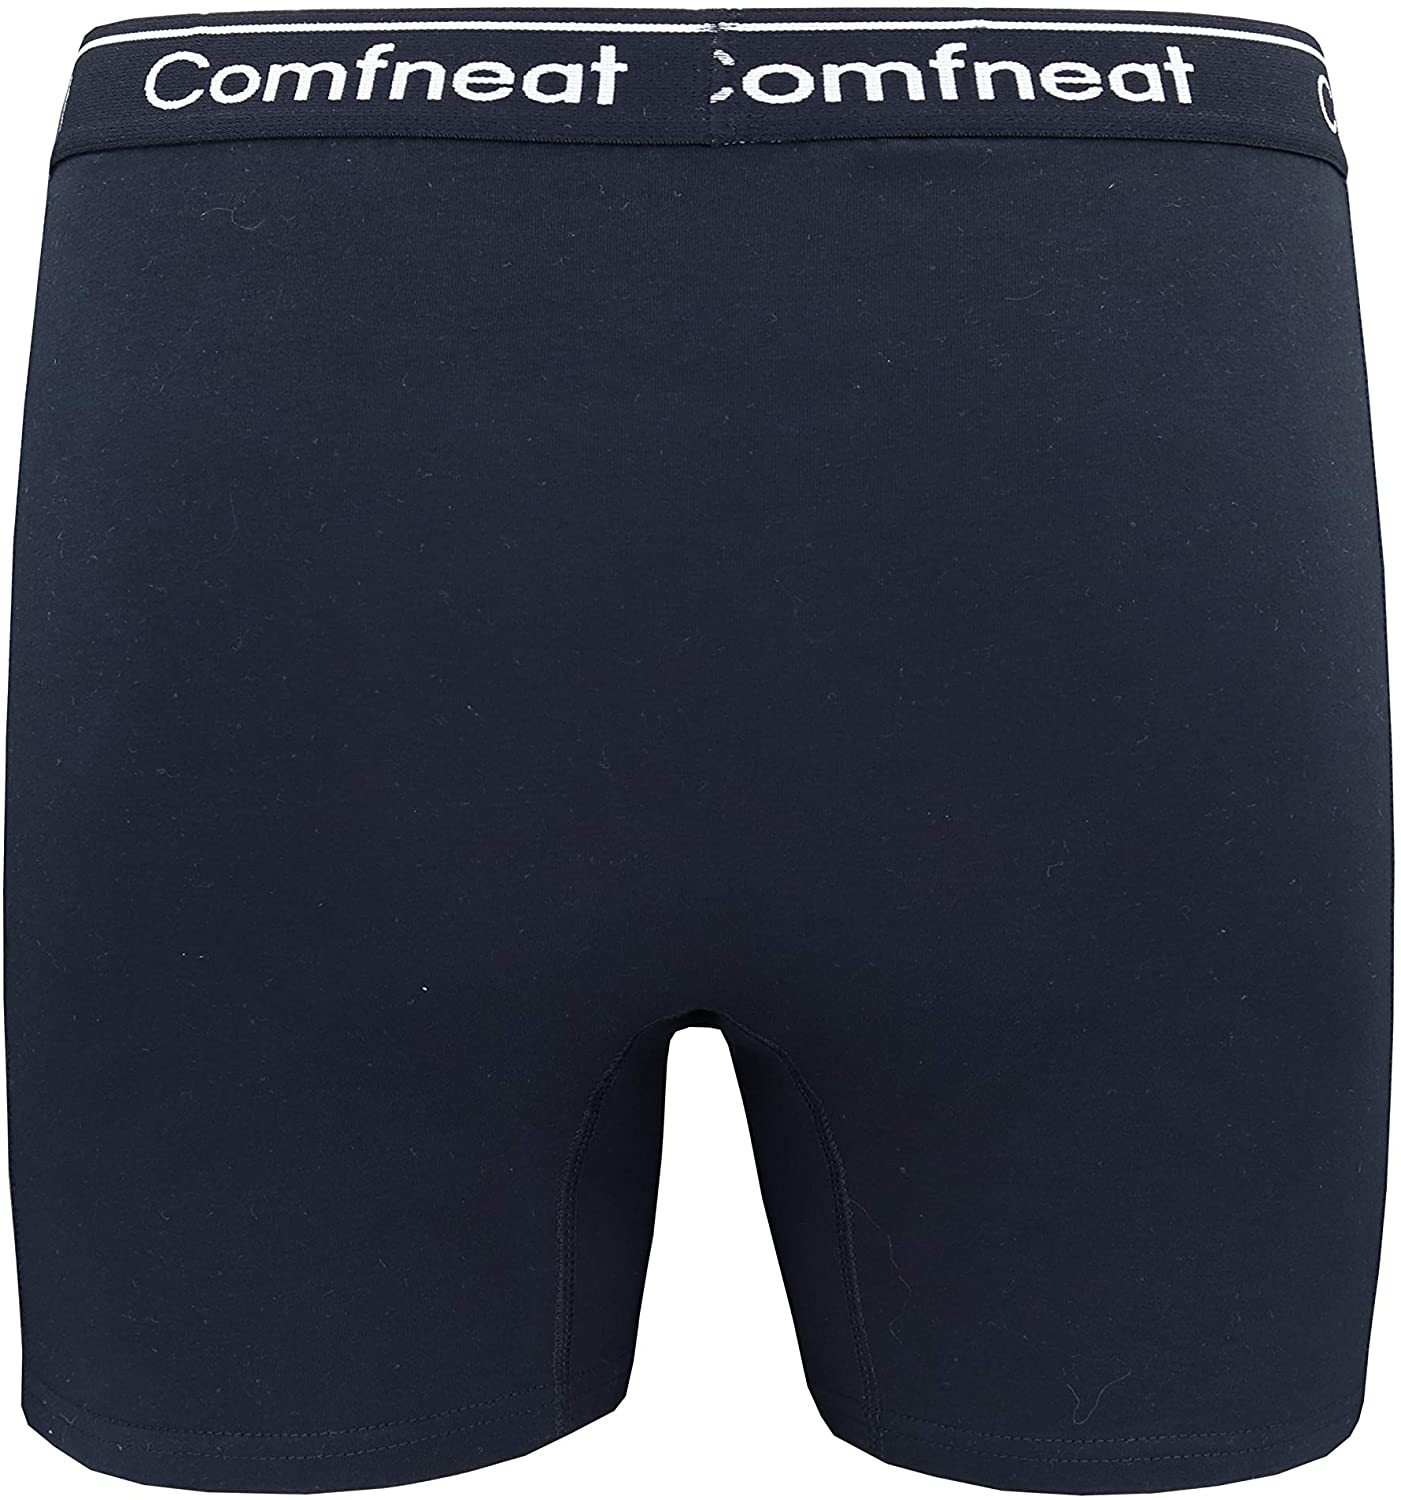 best boxer briefs for big and tall